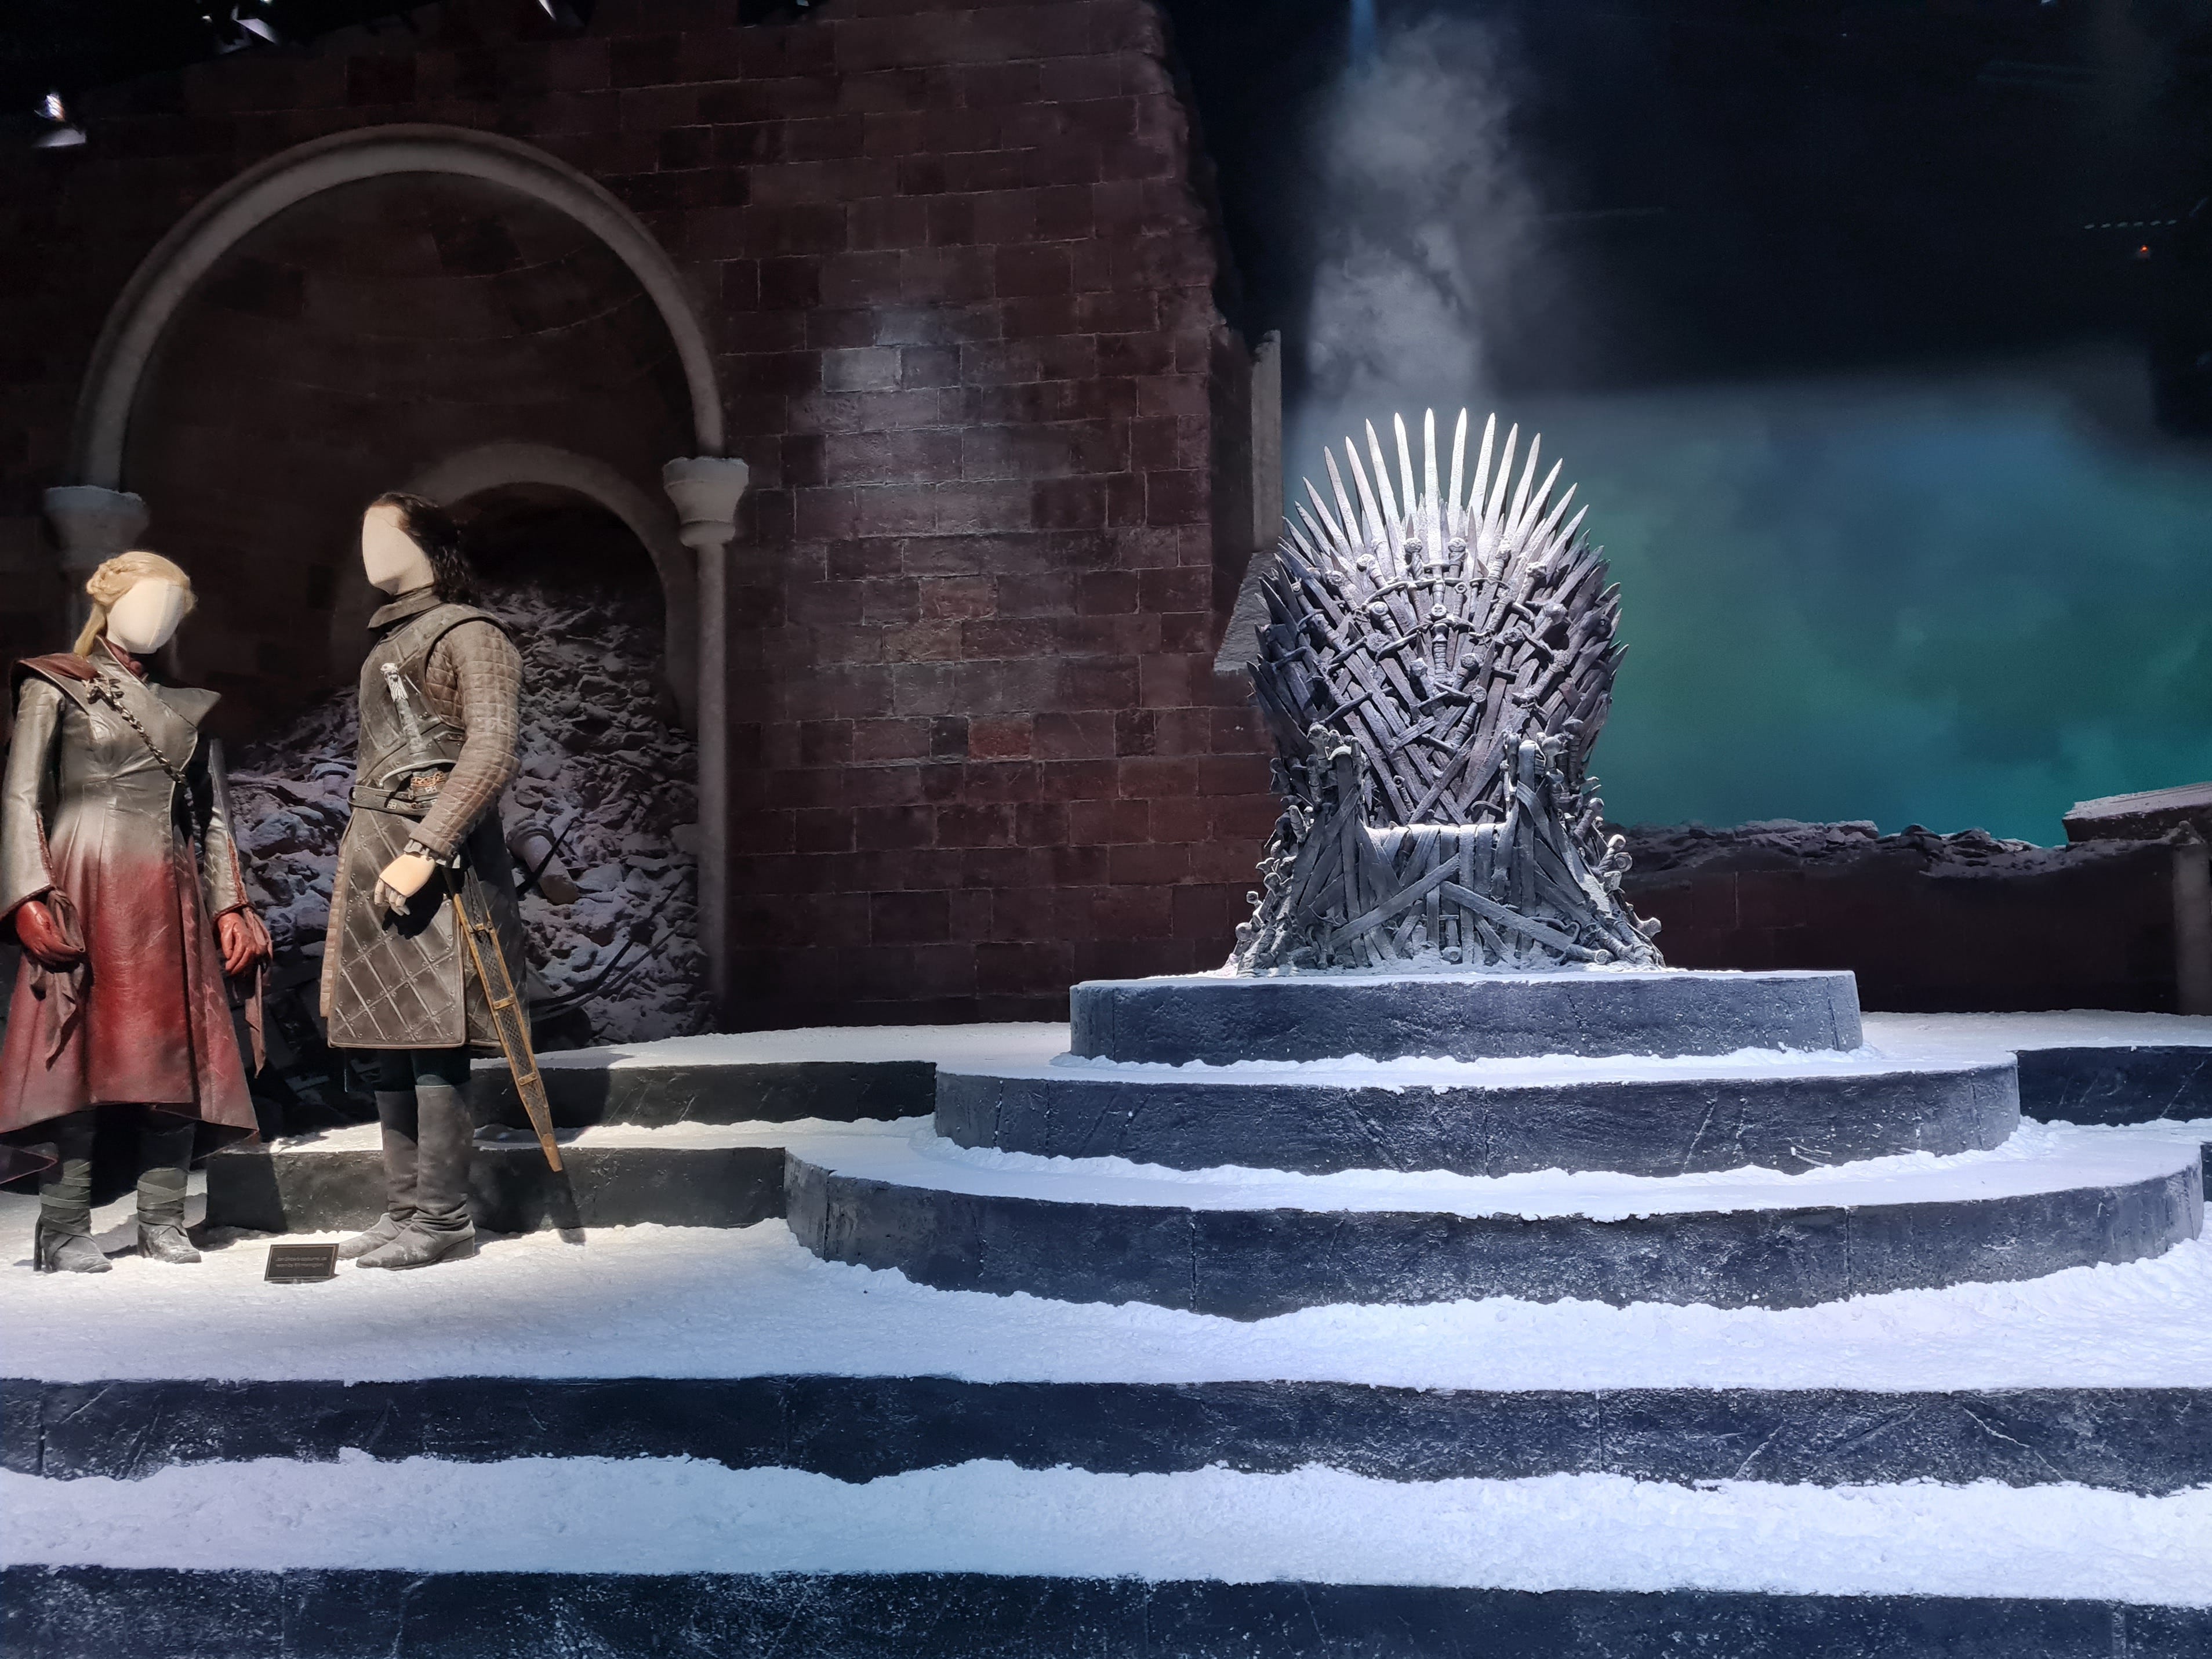 <p>The tour finished at the Iron Throne, a dragon flitting behind the rubble on a digital back wall. </p><p>It was a fitting endpoint seeing as it was the location where Jon killed Daenerys, controversially culling her brewing tyranny and ending the series.</p>